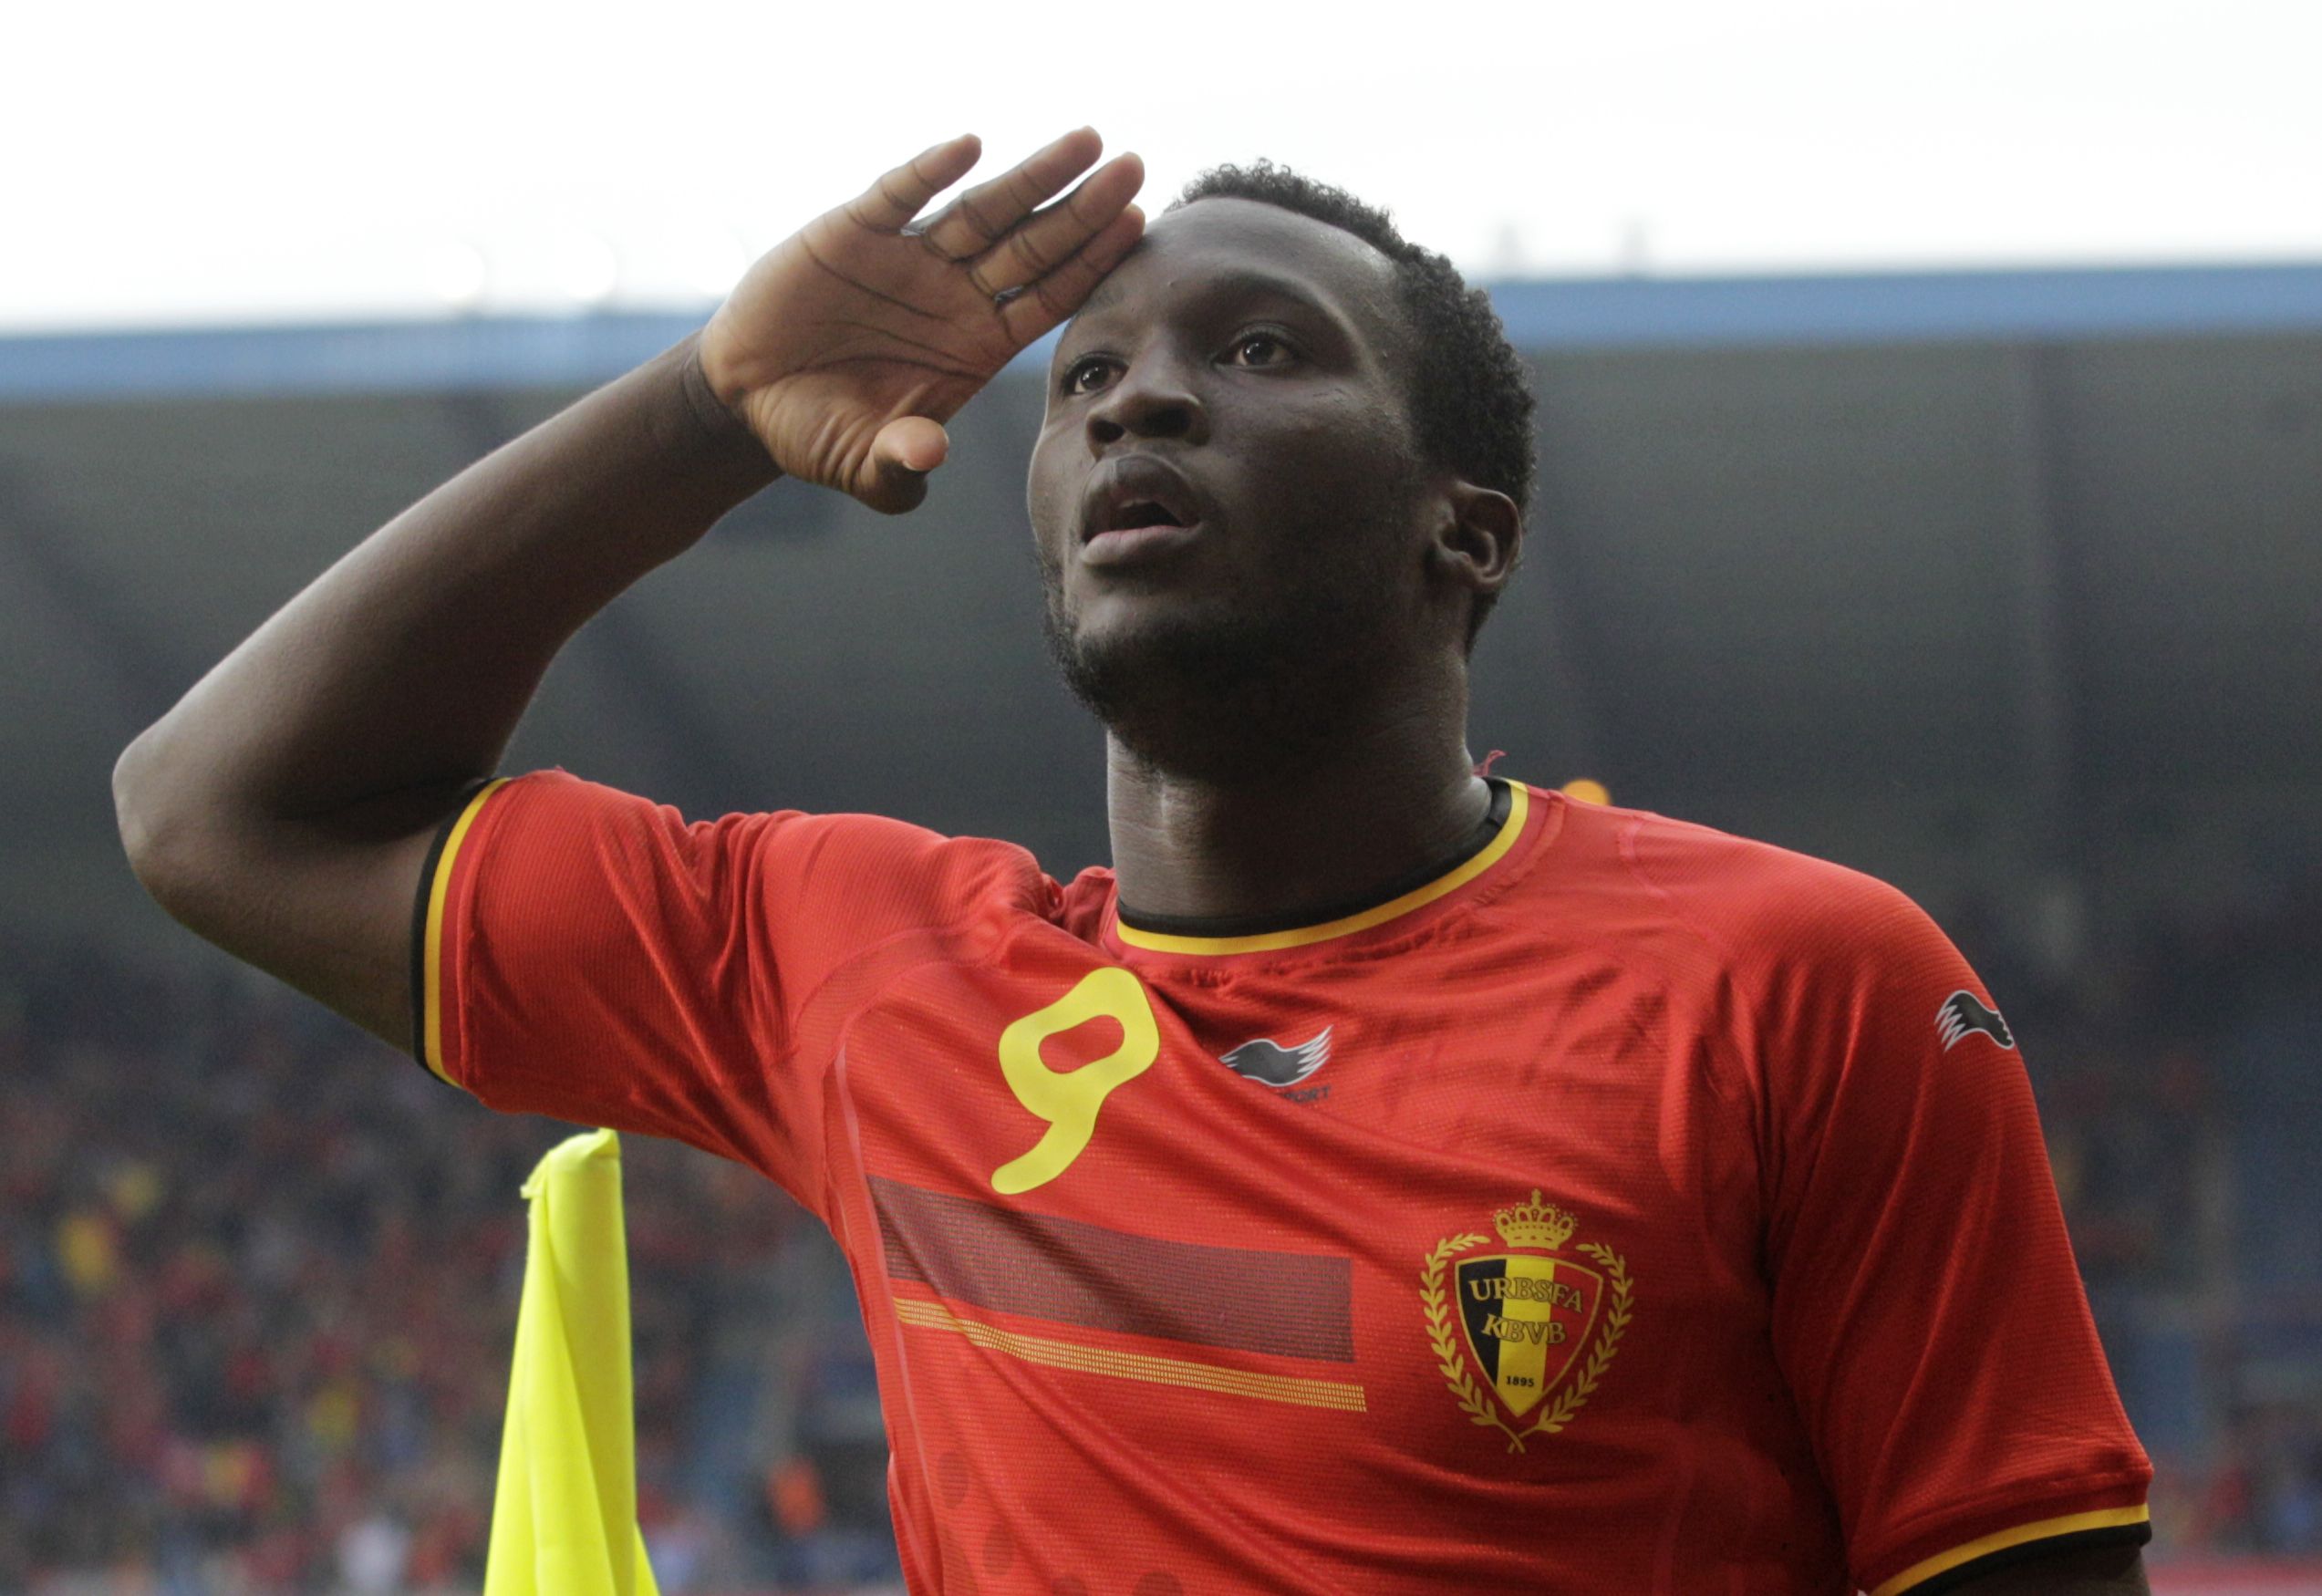 Belgium's Romelu Lukaku picked up a hat trick against Luxembourg and scored another against Sweden last week. (AP)